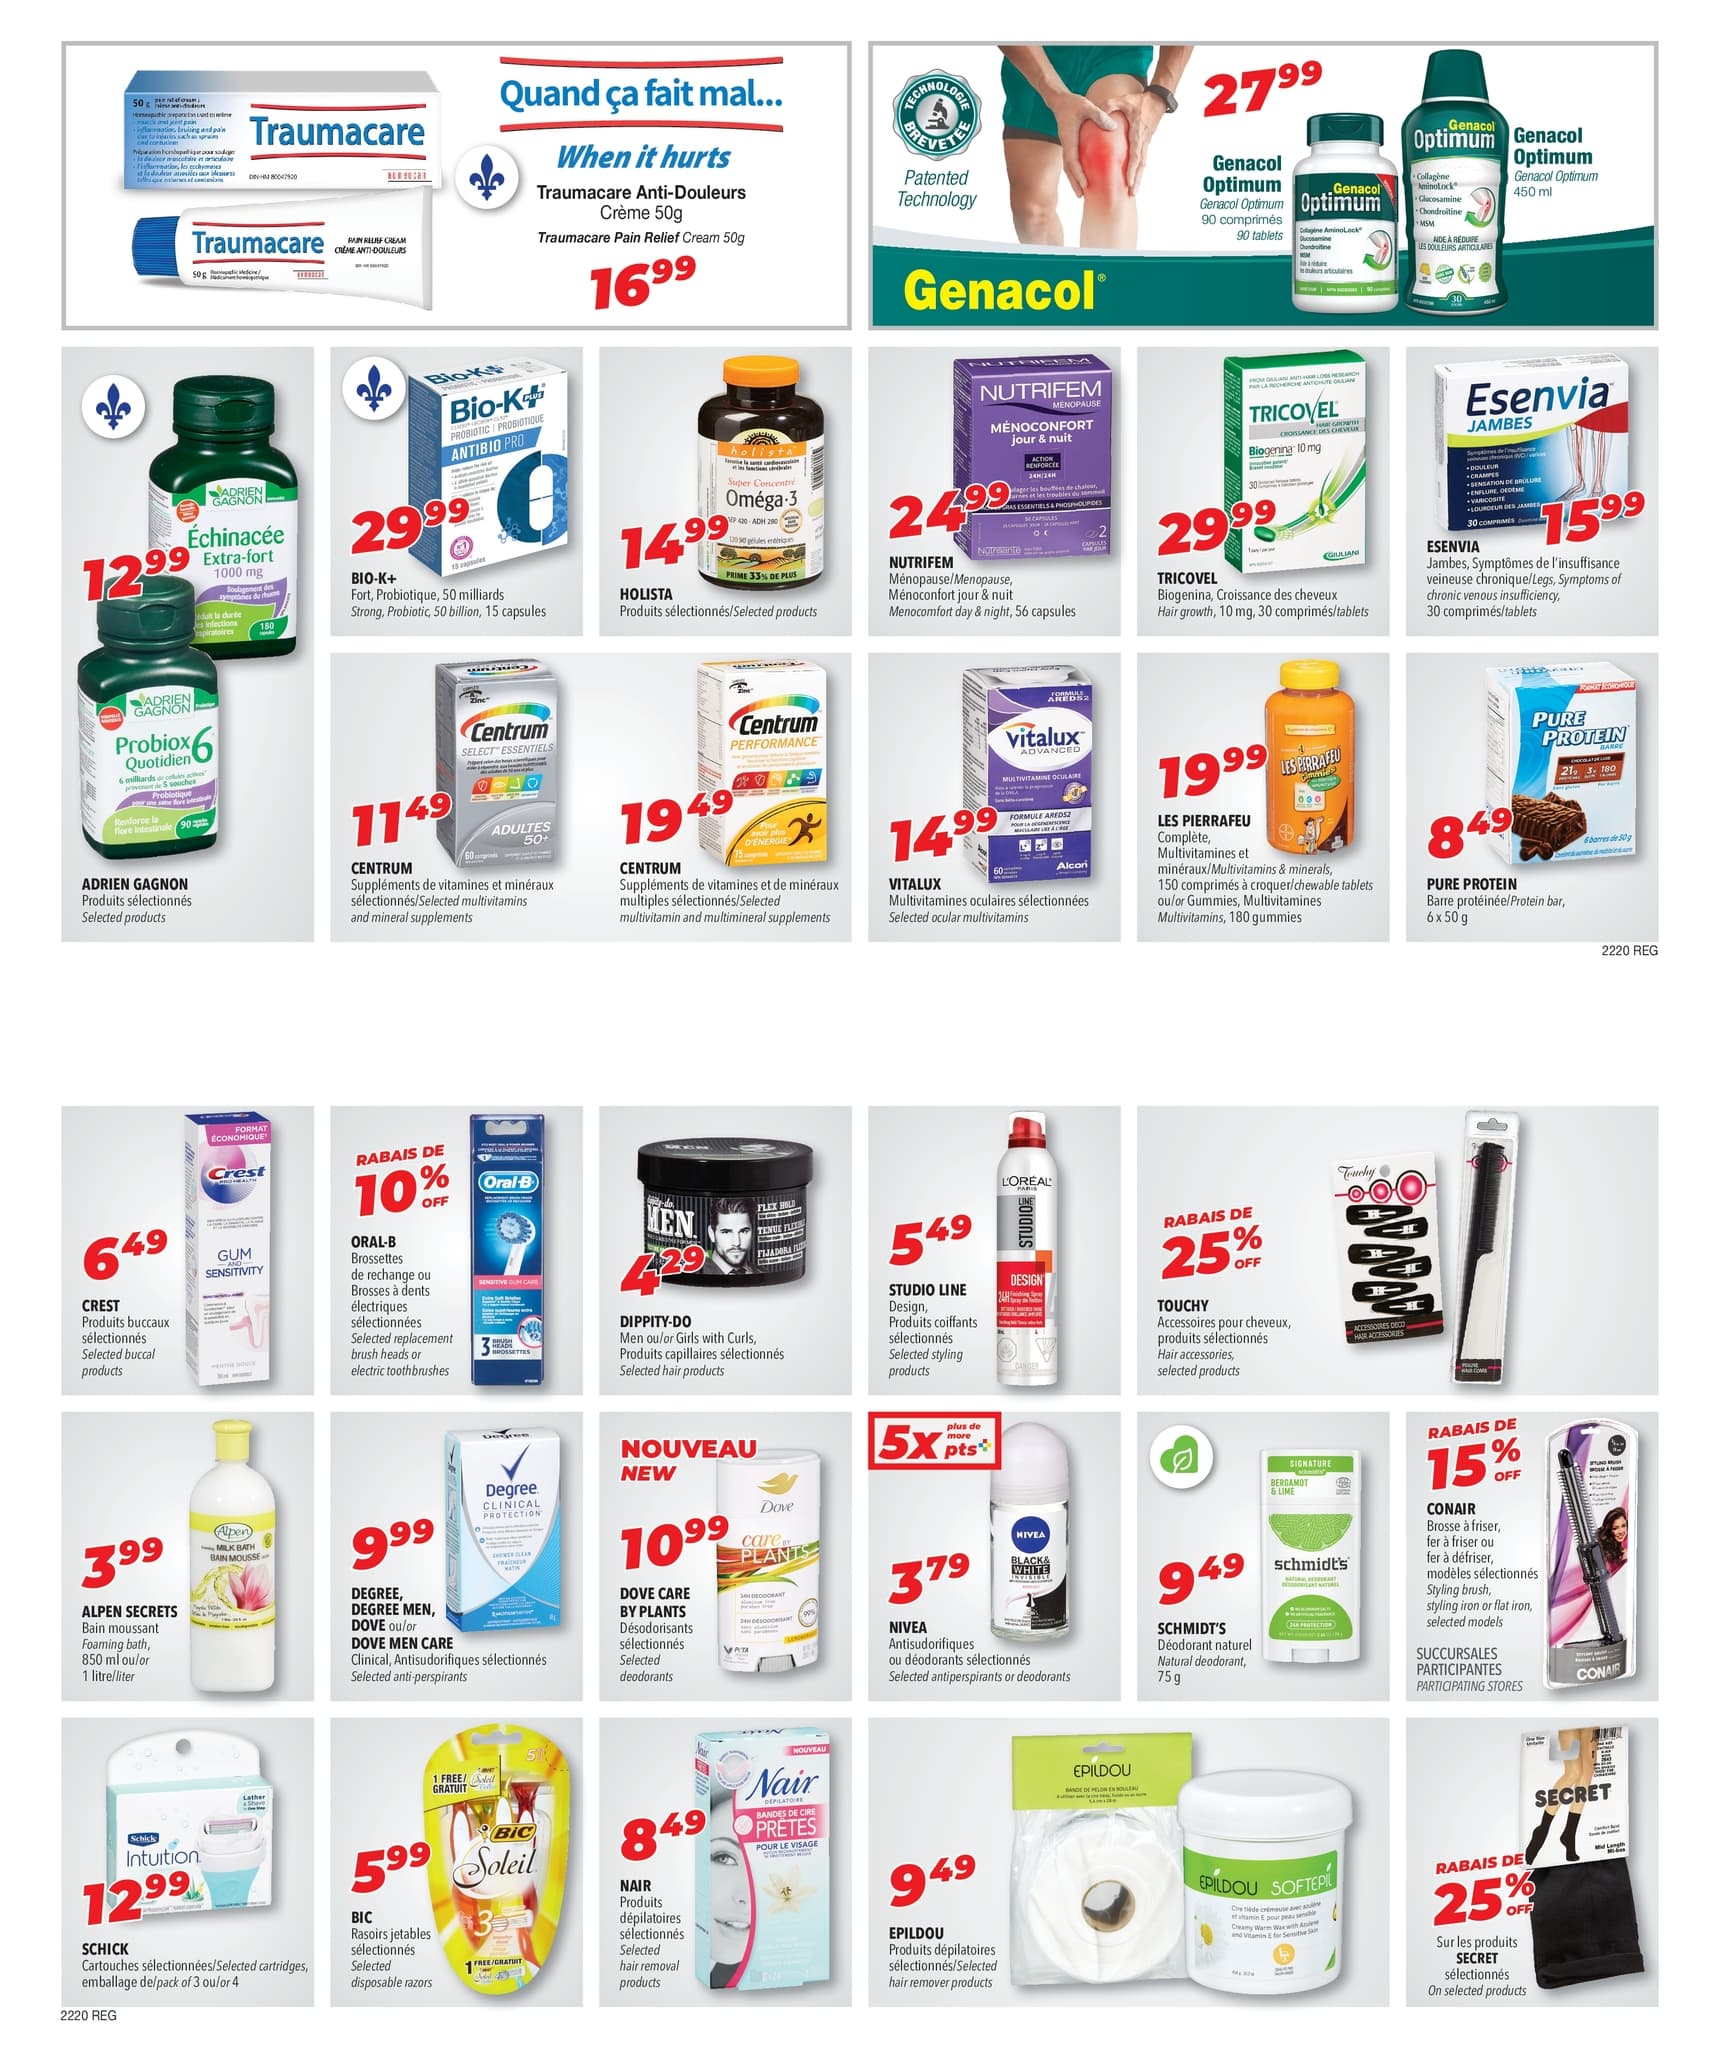 Familiprix - Weekly Flyer Specials - Page 5